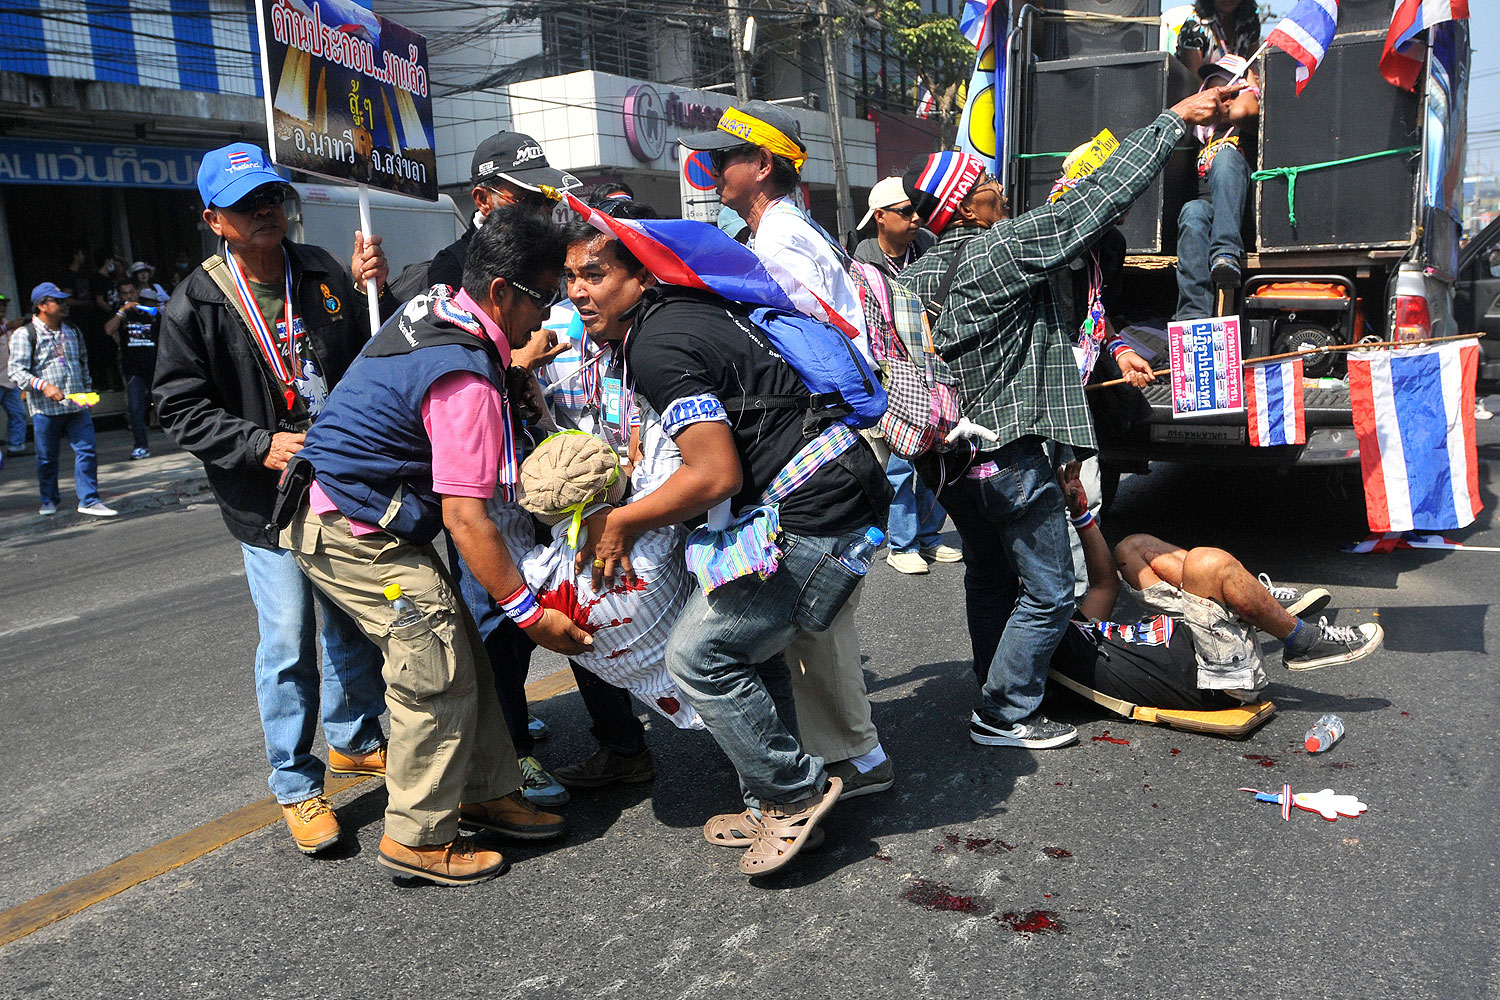 Anti-government protesters help a fellow protester injured in a grenade attack during a rally in Bangkok Jan. 17, 2014 (Reuters)